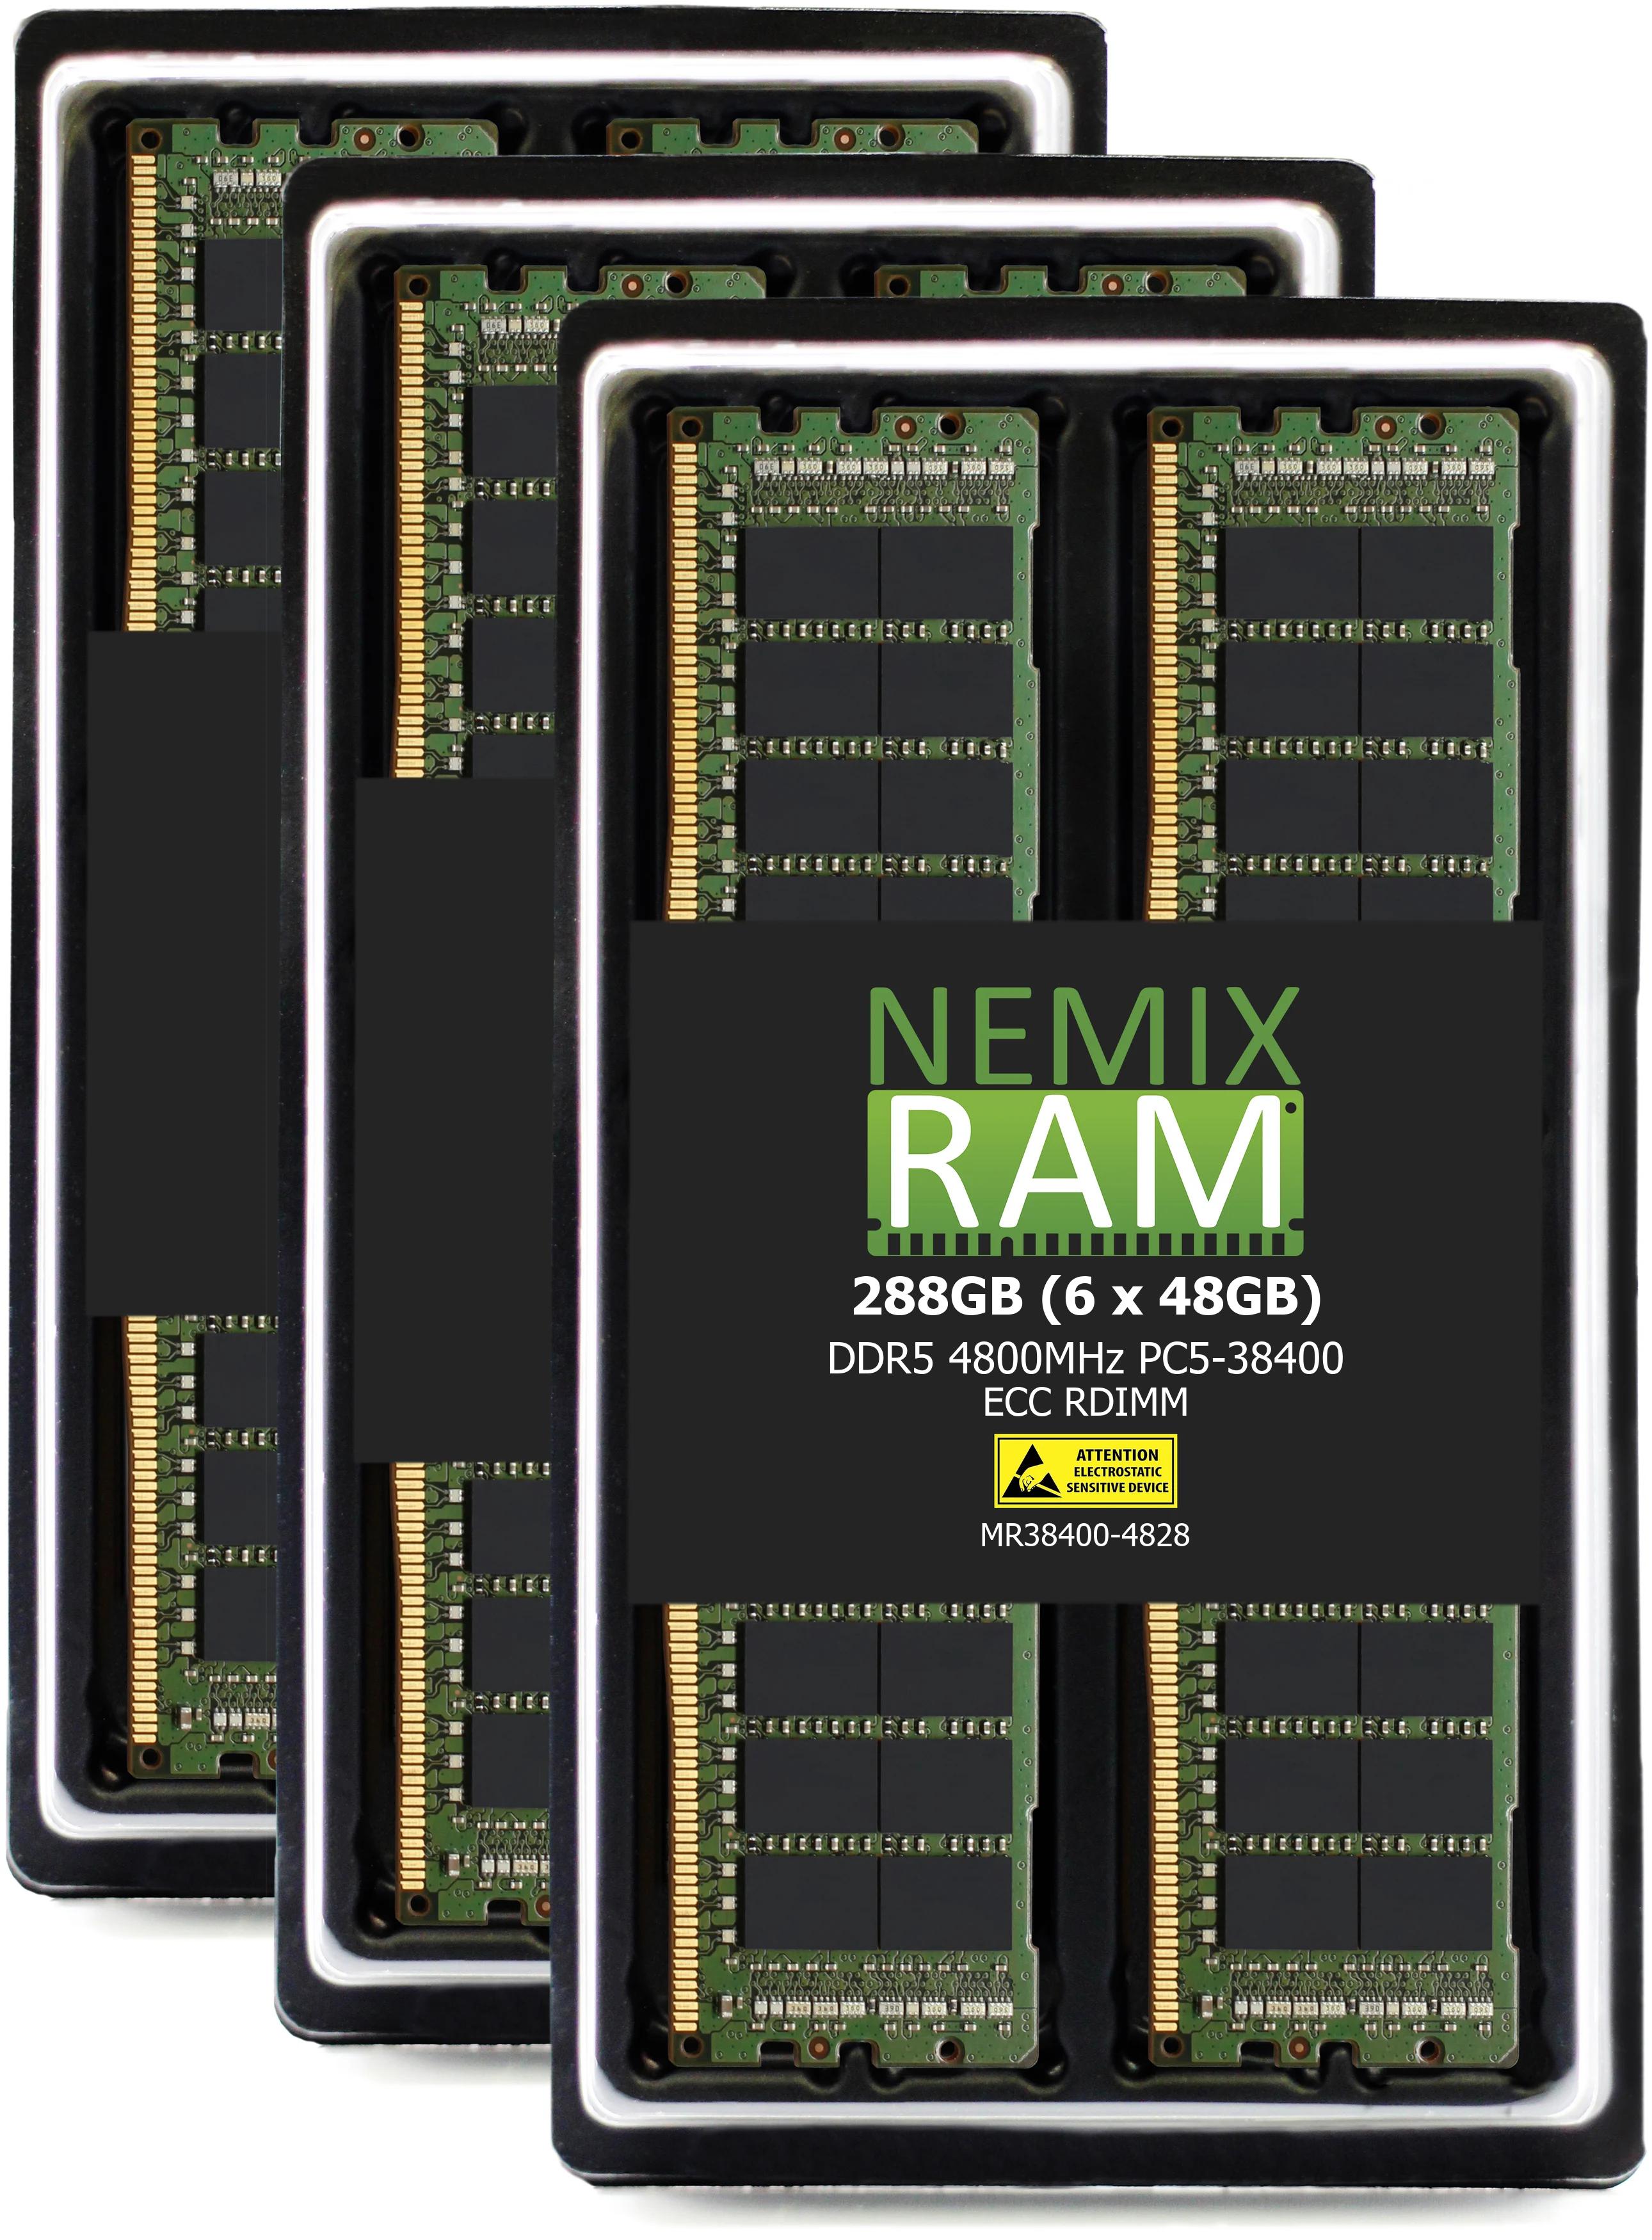 THINKMATE - GPX-WS-740RTP7 Workstation Memory Upgrade